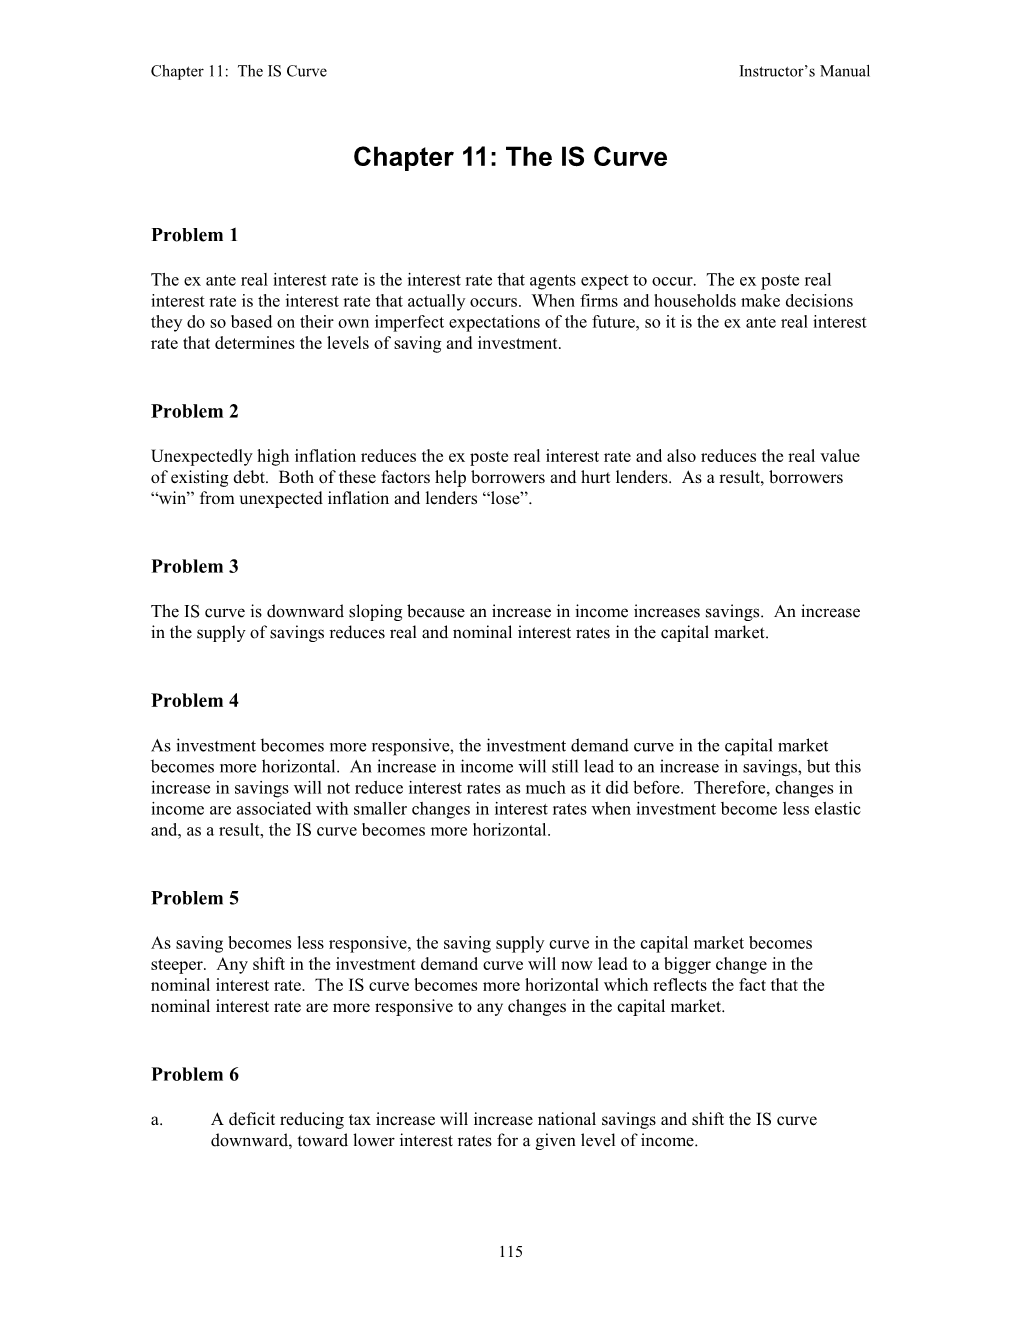 Solutions to Chapter 13